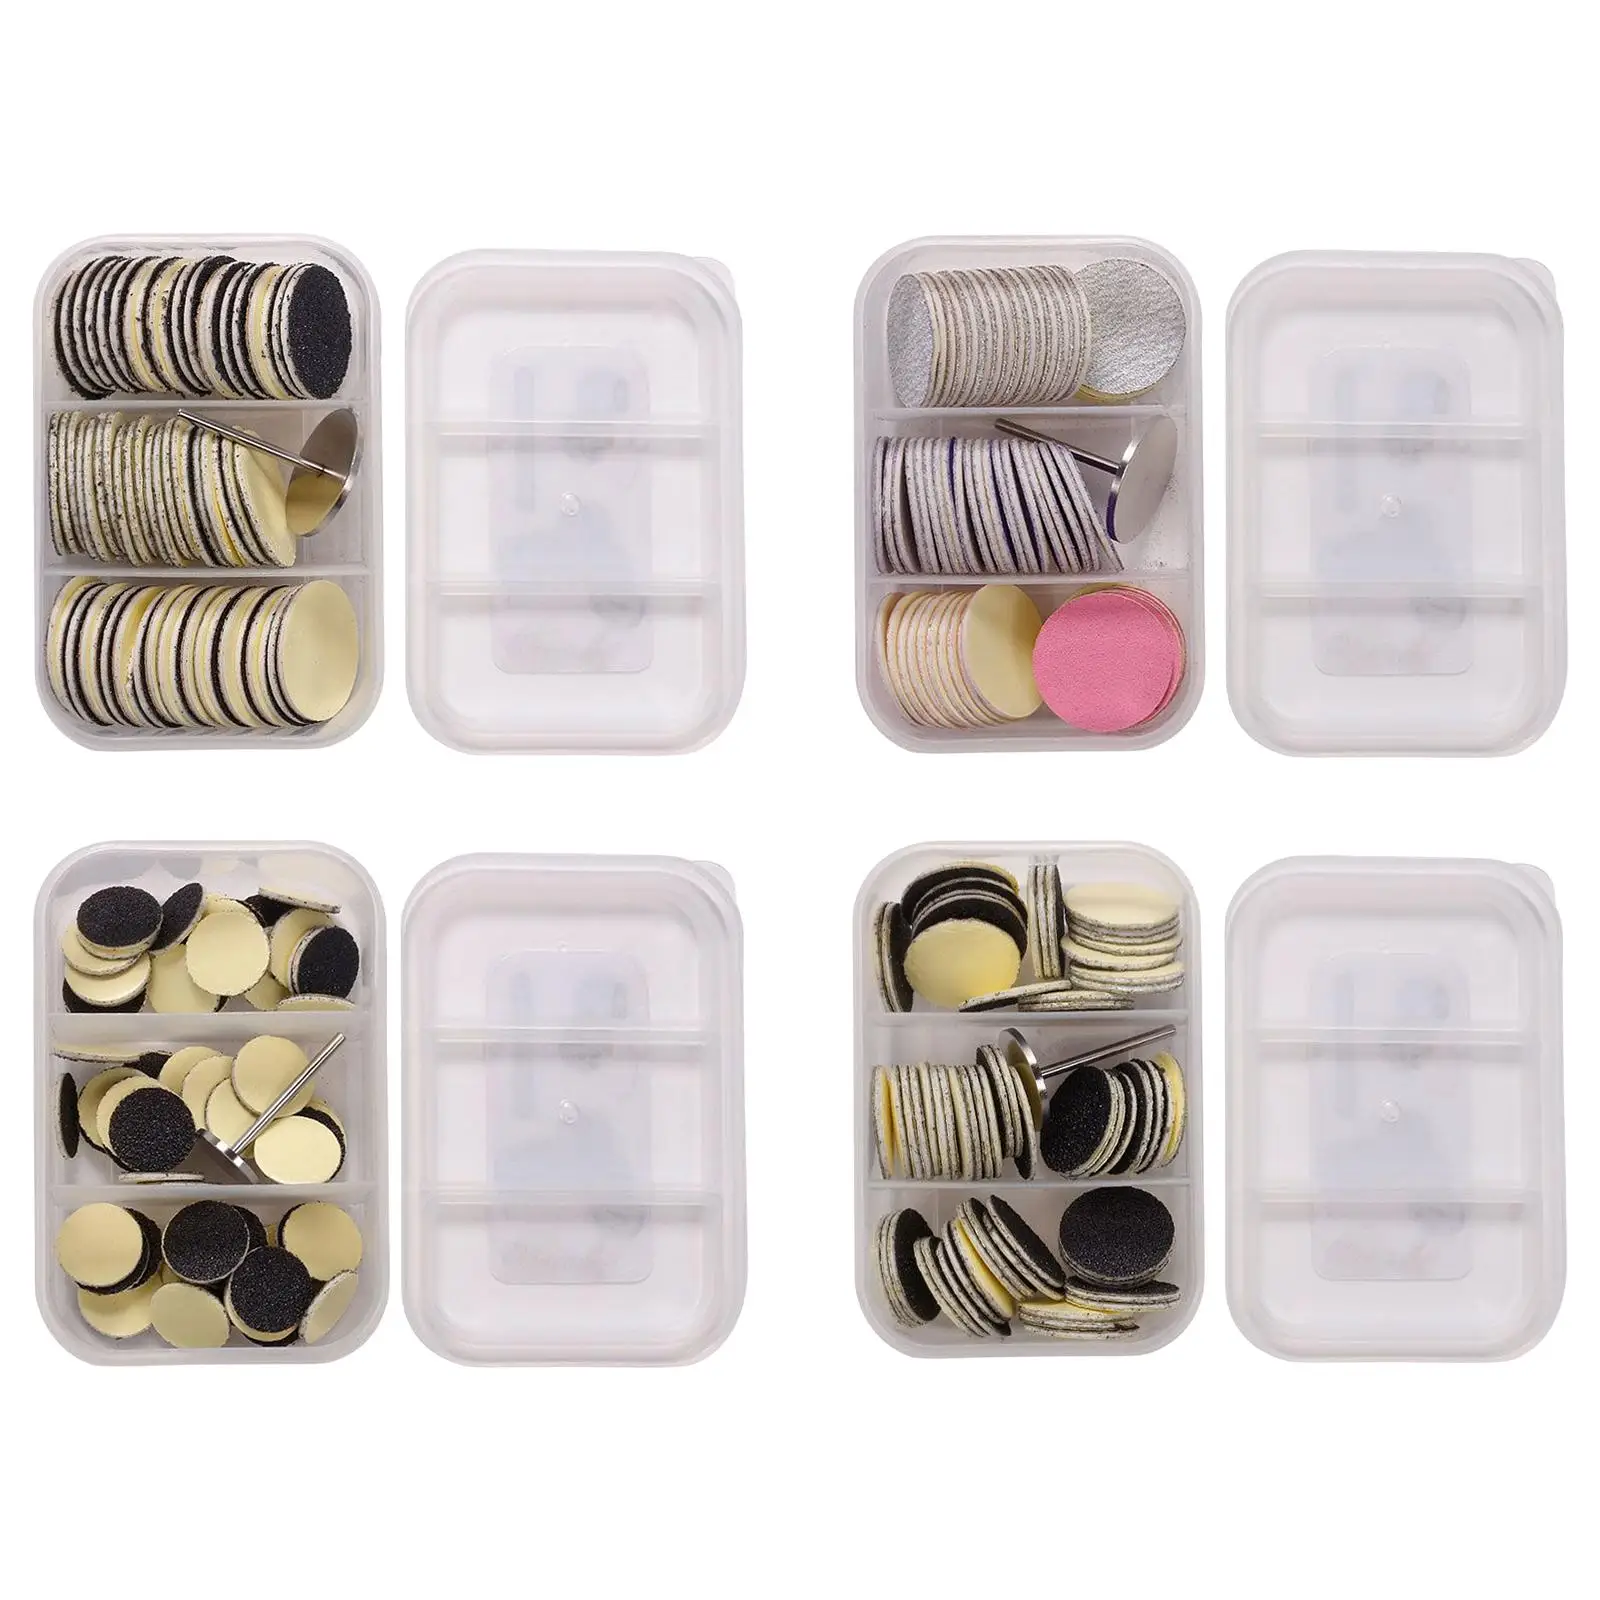 60Pcs Replaceable Sanding Papers Polishing Craft Pedicure with Storage Case Sanding Discs for Skin Electric Foot Rasp files